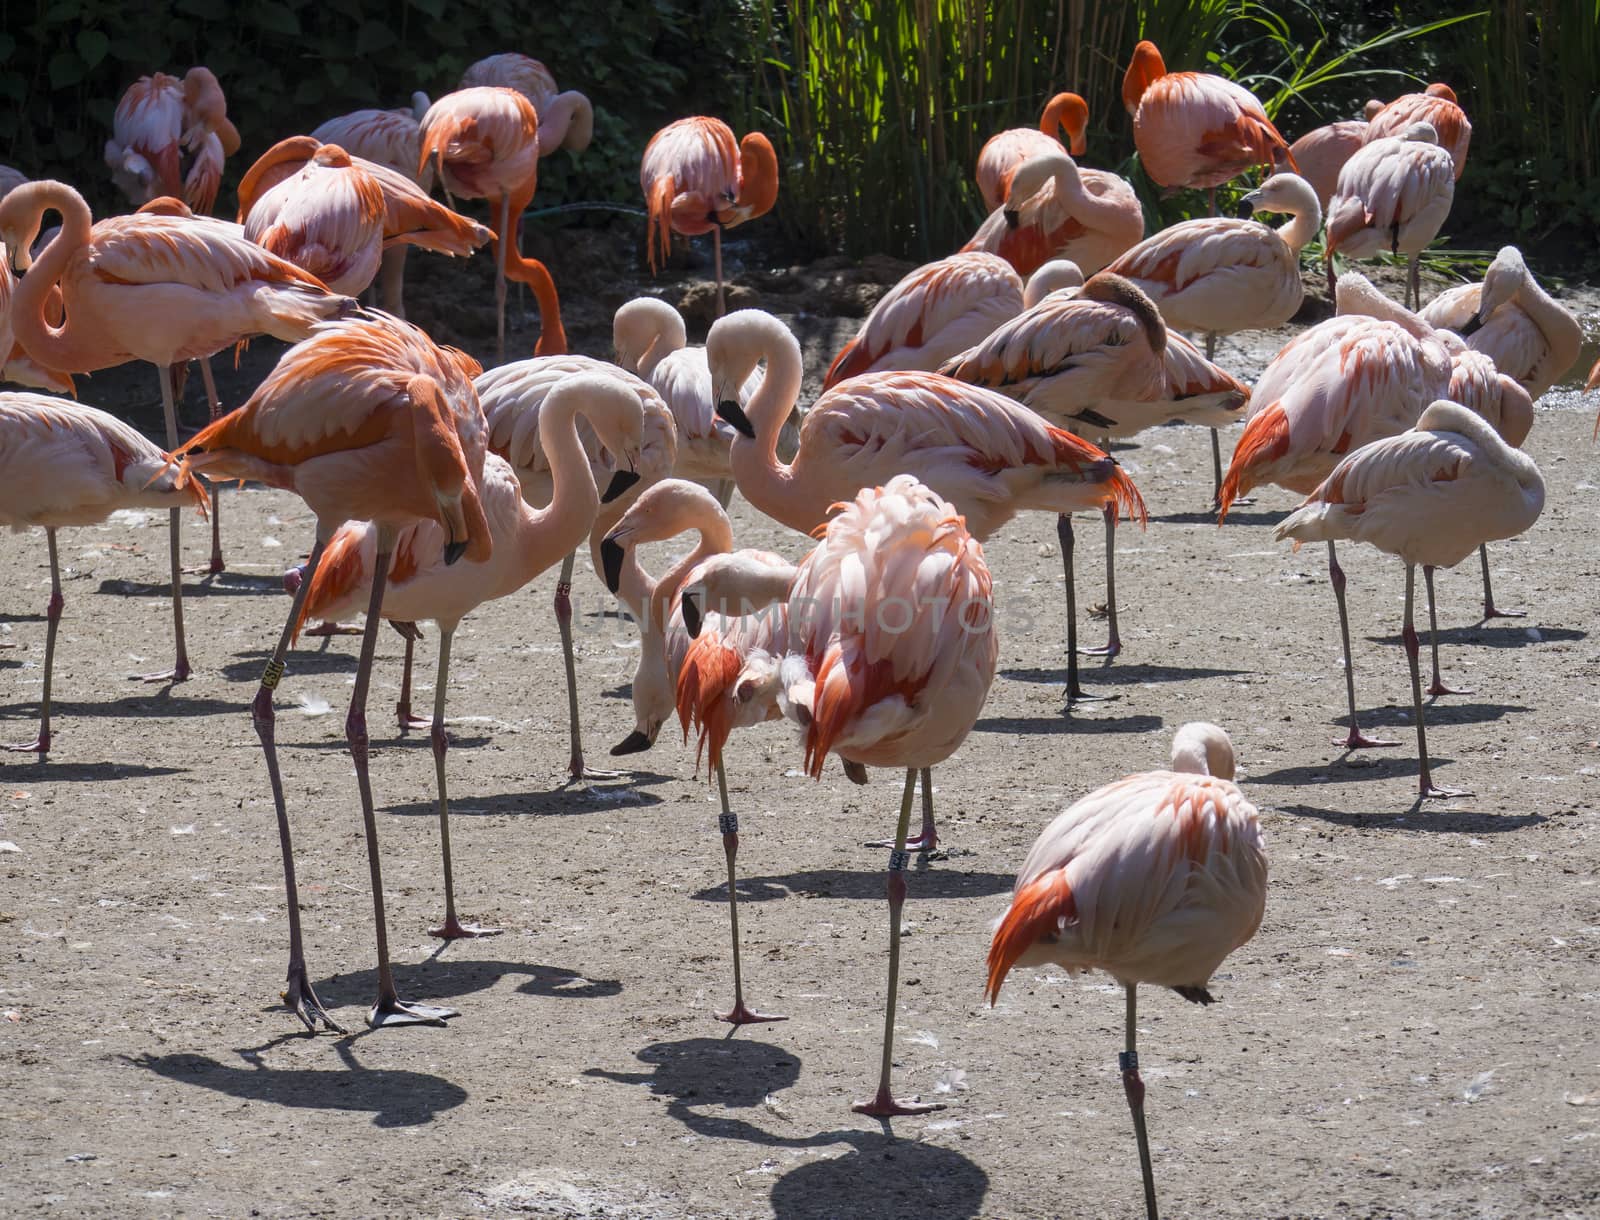 Group of red and pink flamingos standing on dirt. Chilean flamingo Phoenicopterus chilensis and The American flamingo Phoenicopterus ruber. by Henkeova